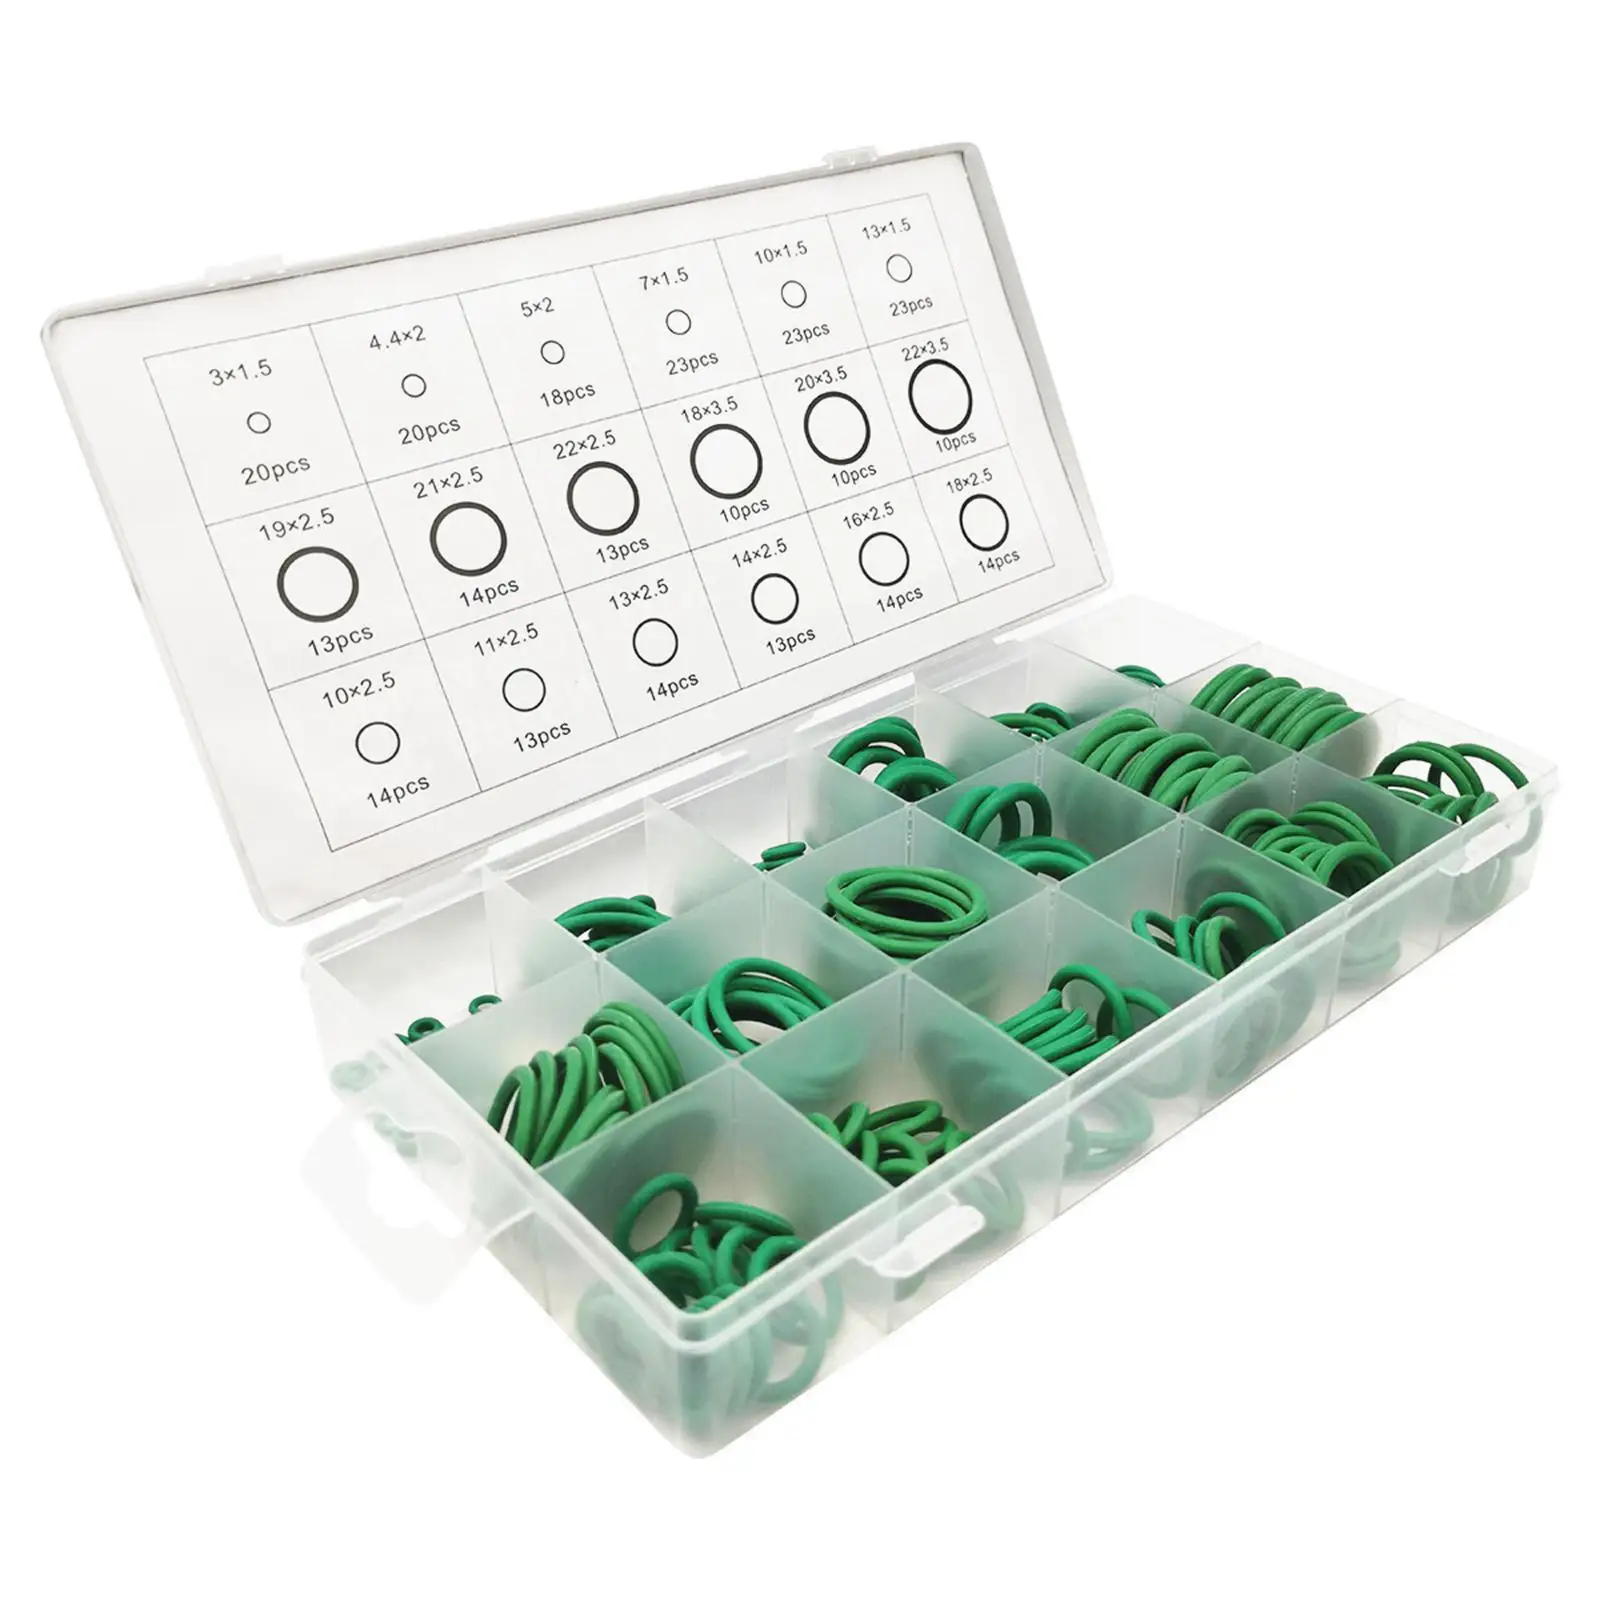 O Ring Assortment Kit Assorted Sealing Washer with Storage Case for Vehicle